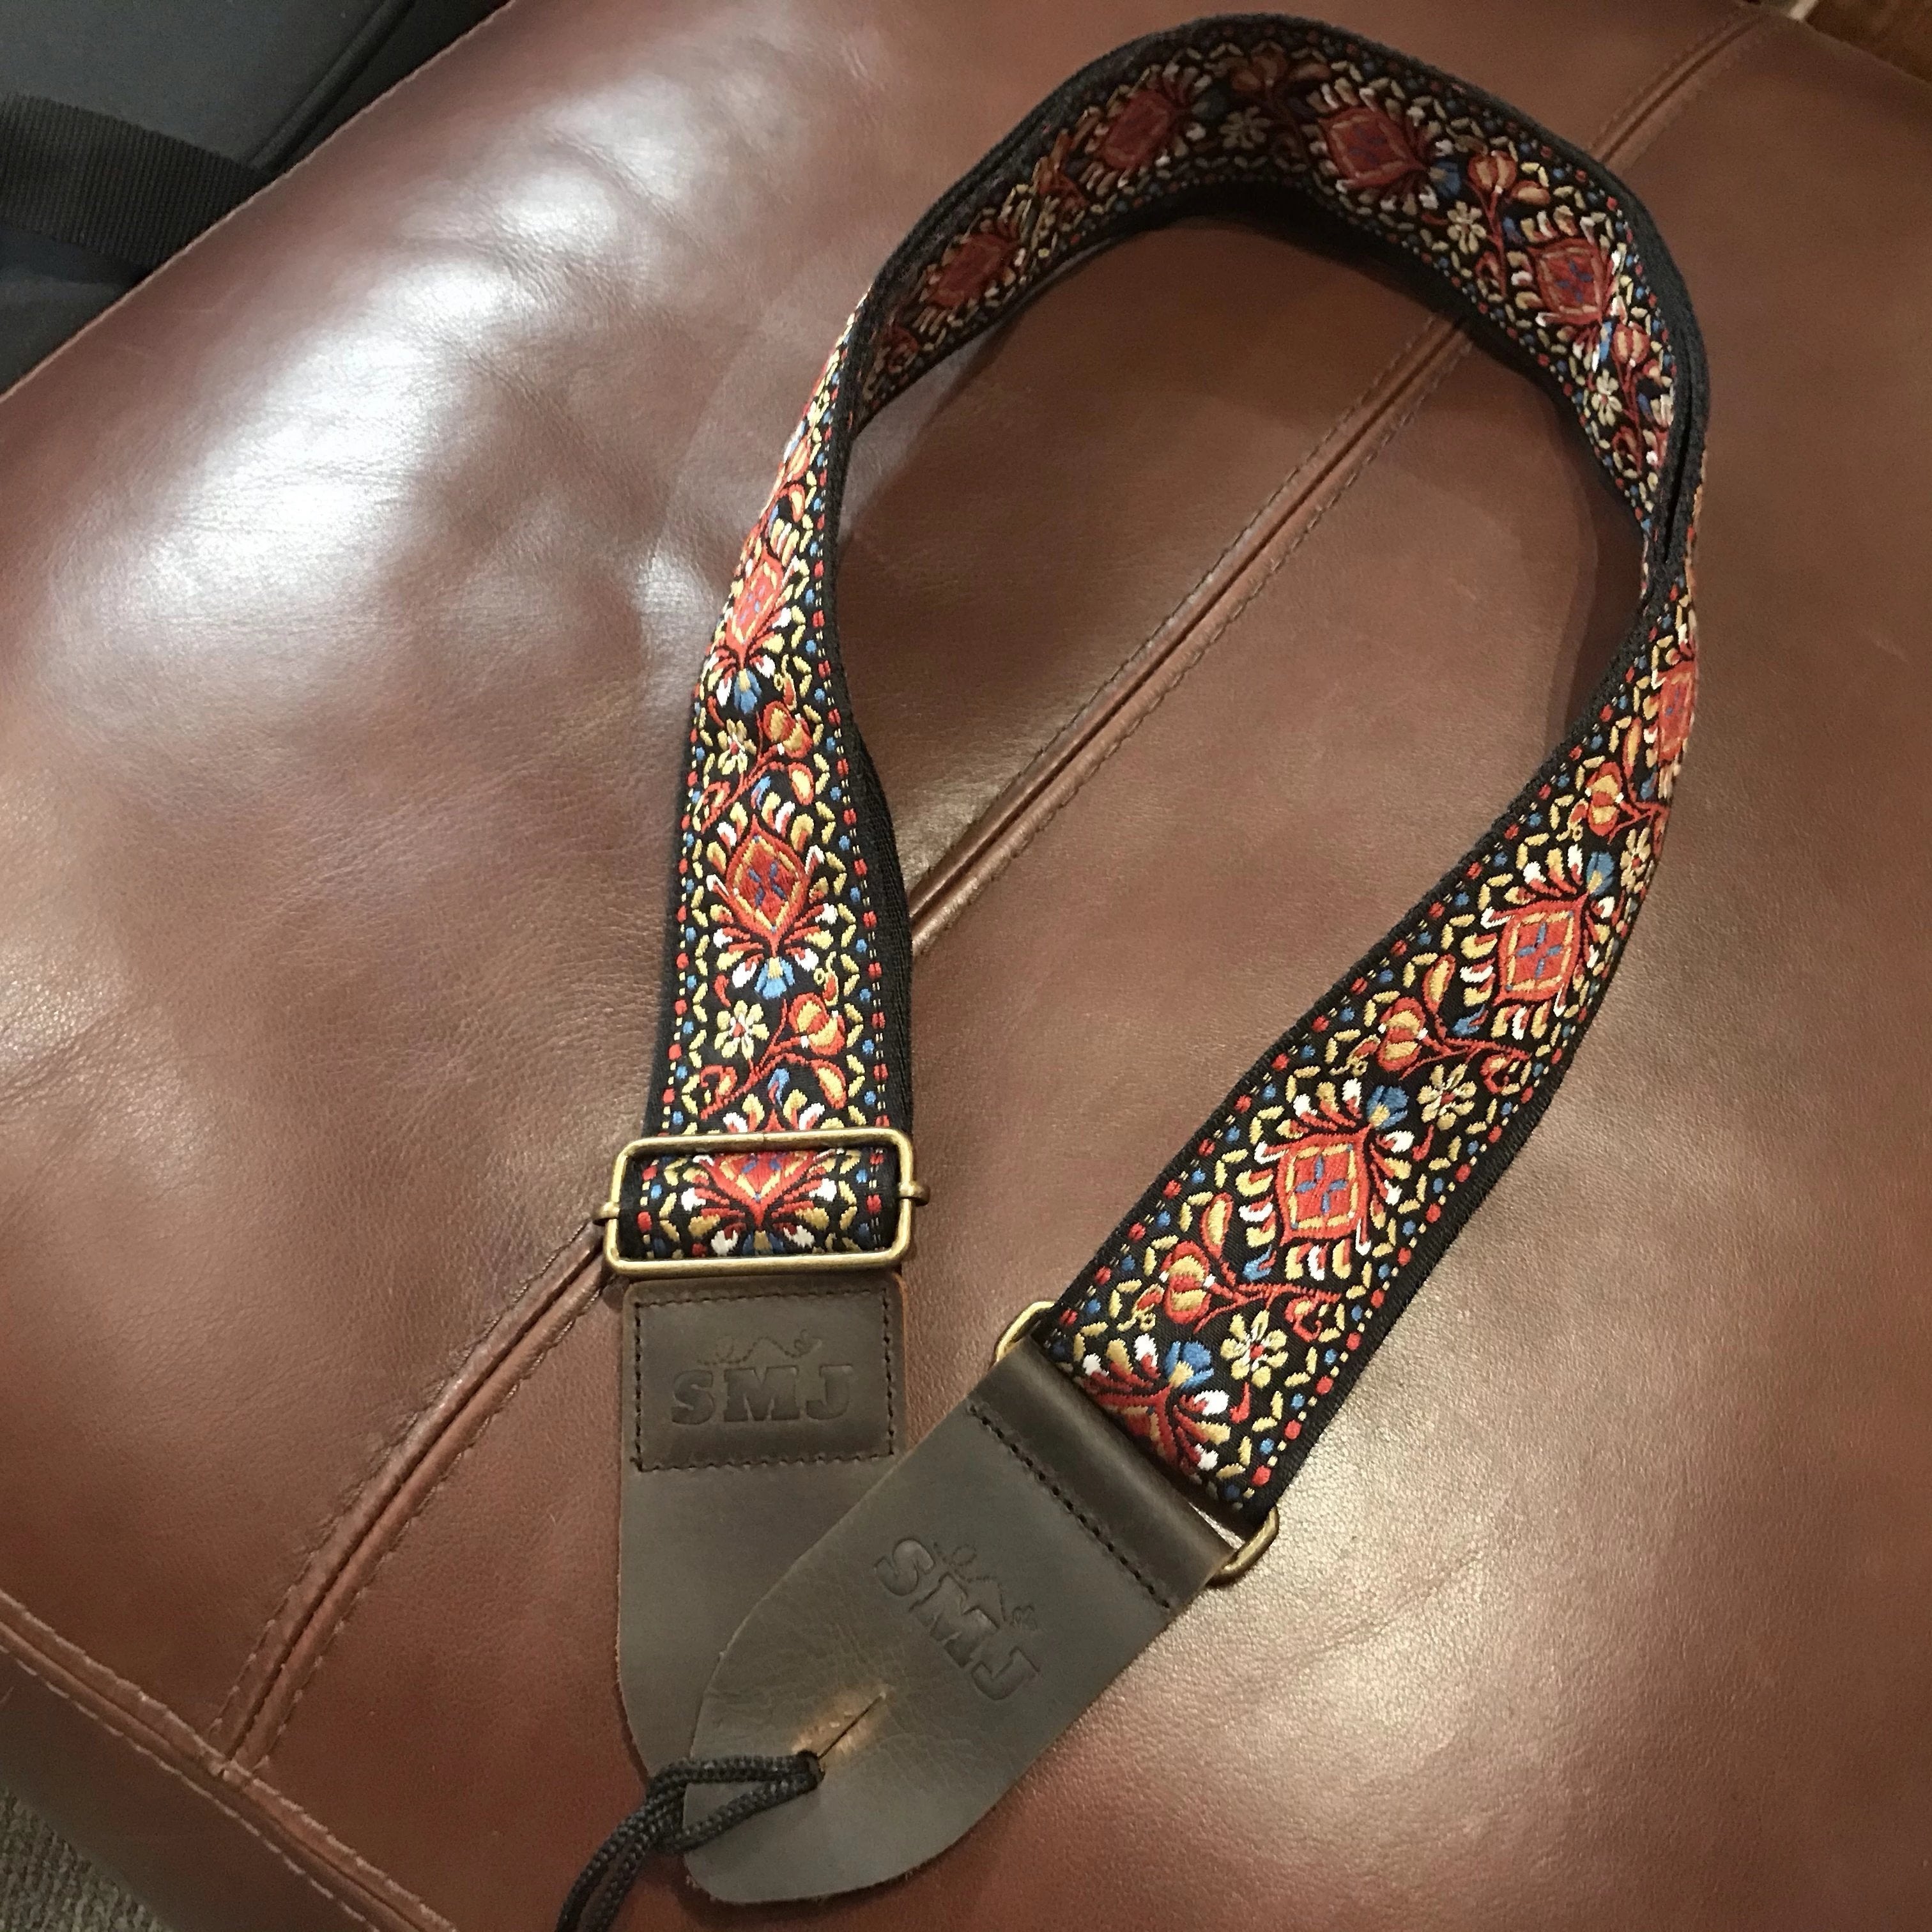 SMJ Reserve Collection "Peacock" Guitar Strap, Accessory for sale at Richards Guitars.